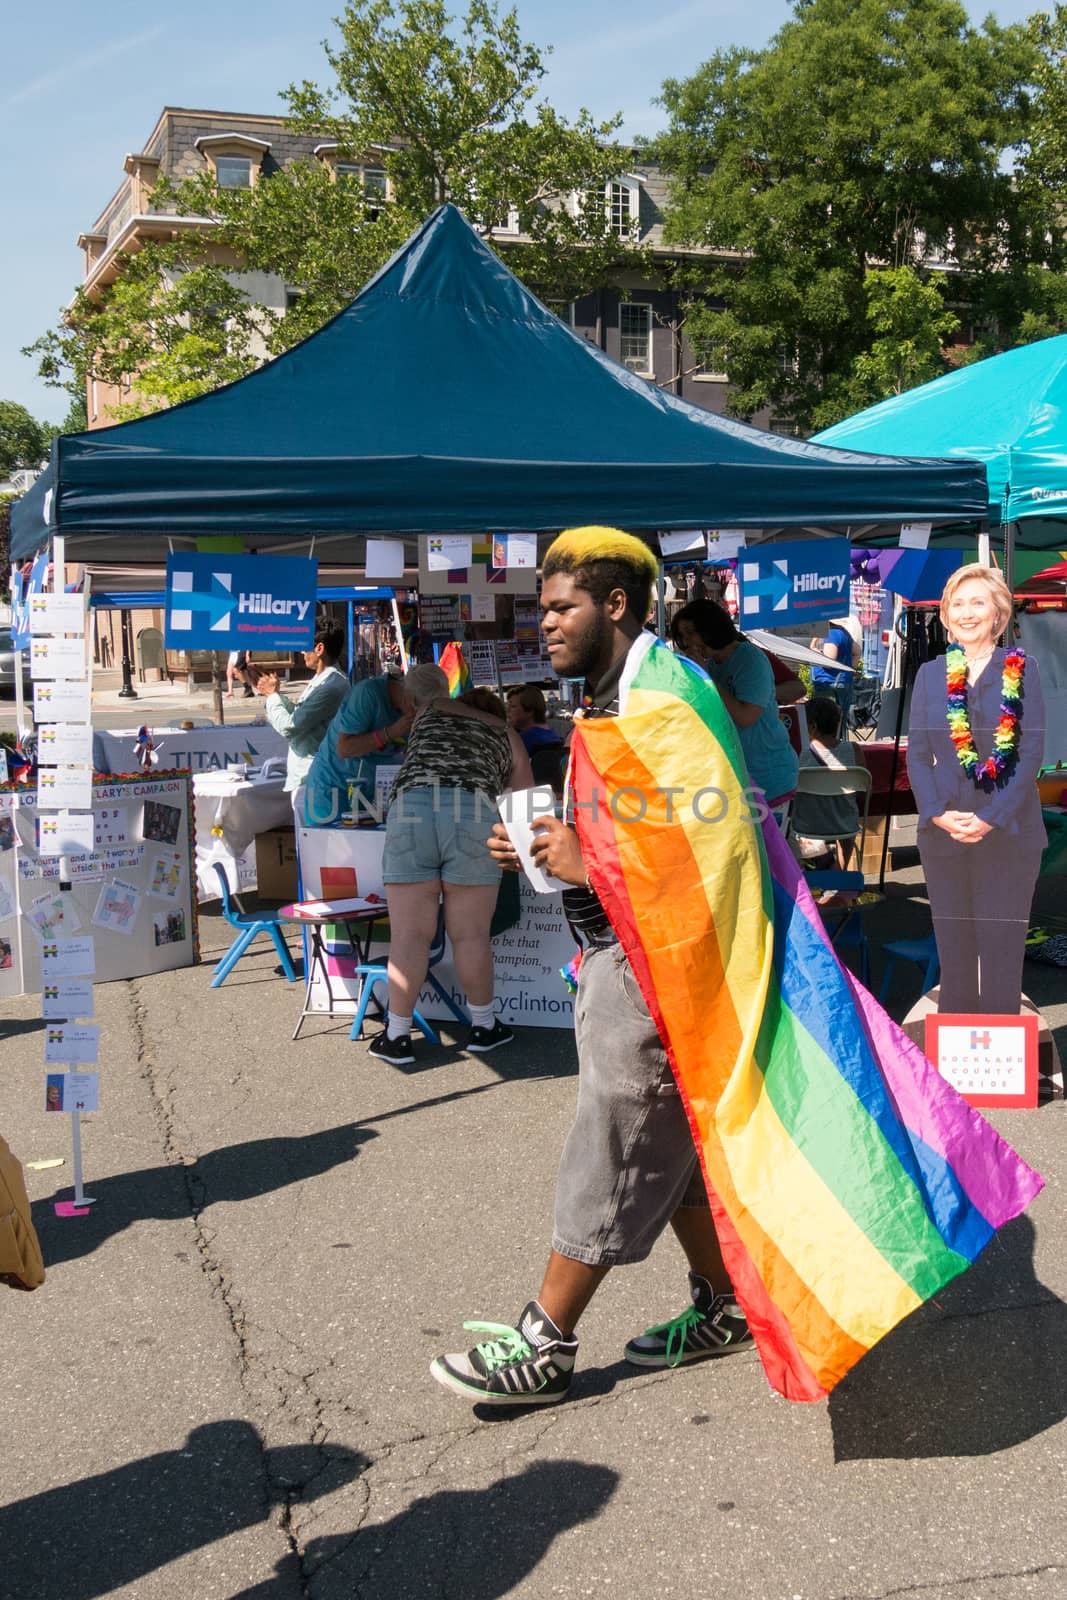 Man wearing LGBT flag before Hillary stand during Rockland Pride by wit_gorski